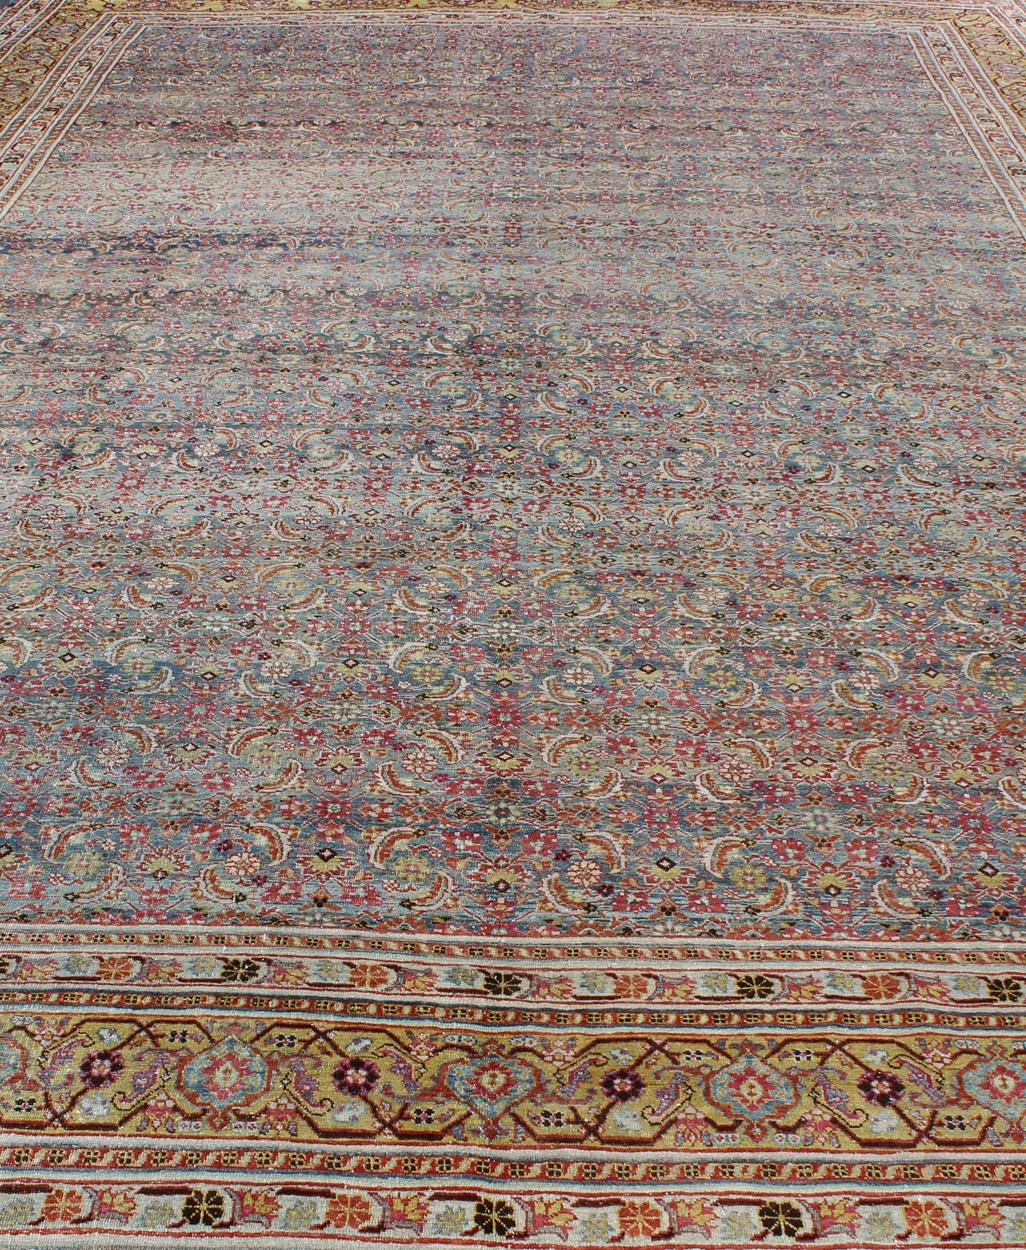 Large Antique Persian Tabriz Rug with Herati Design in Blue tones and Gold For Sale 4